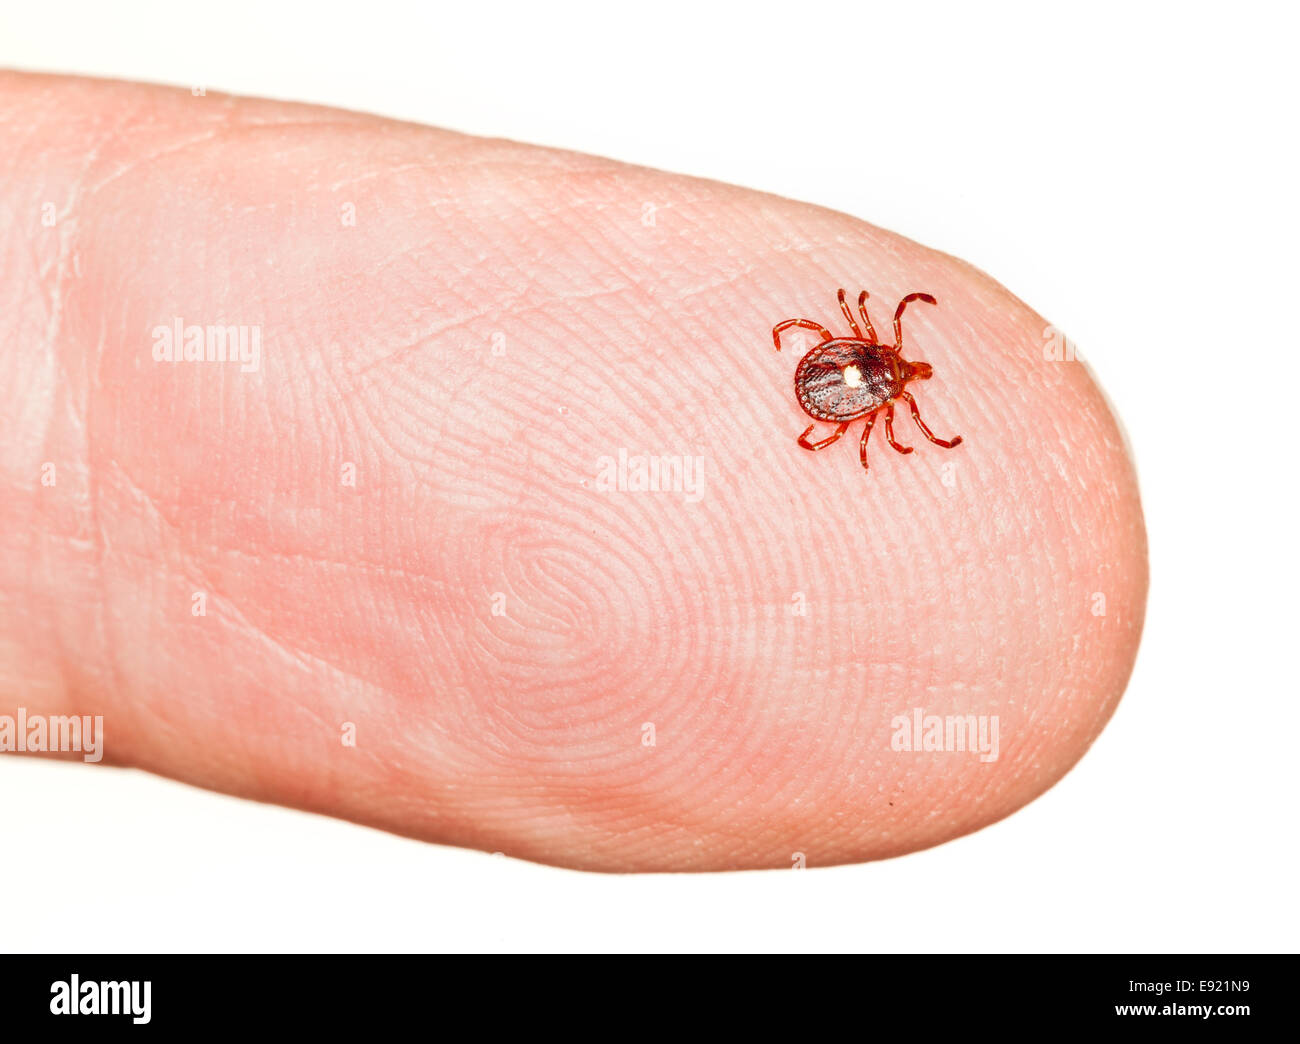 Lone star or seed tick on finger Stock Photo